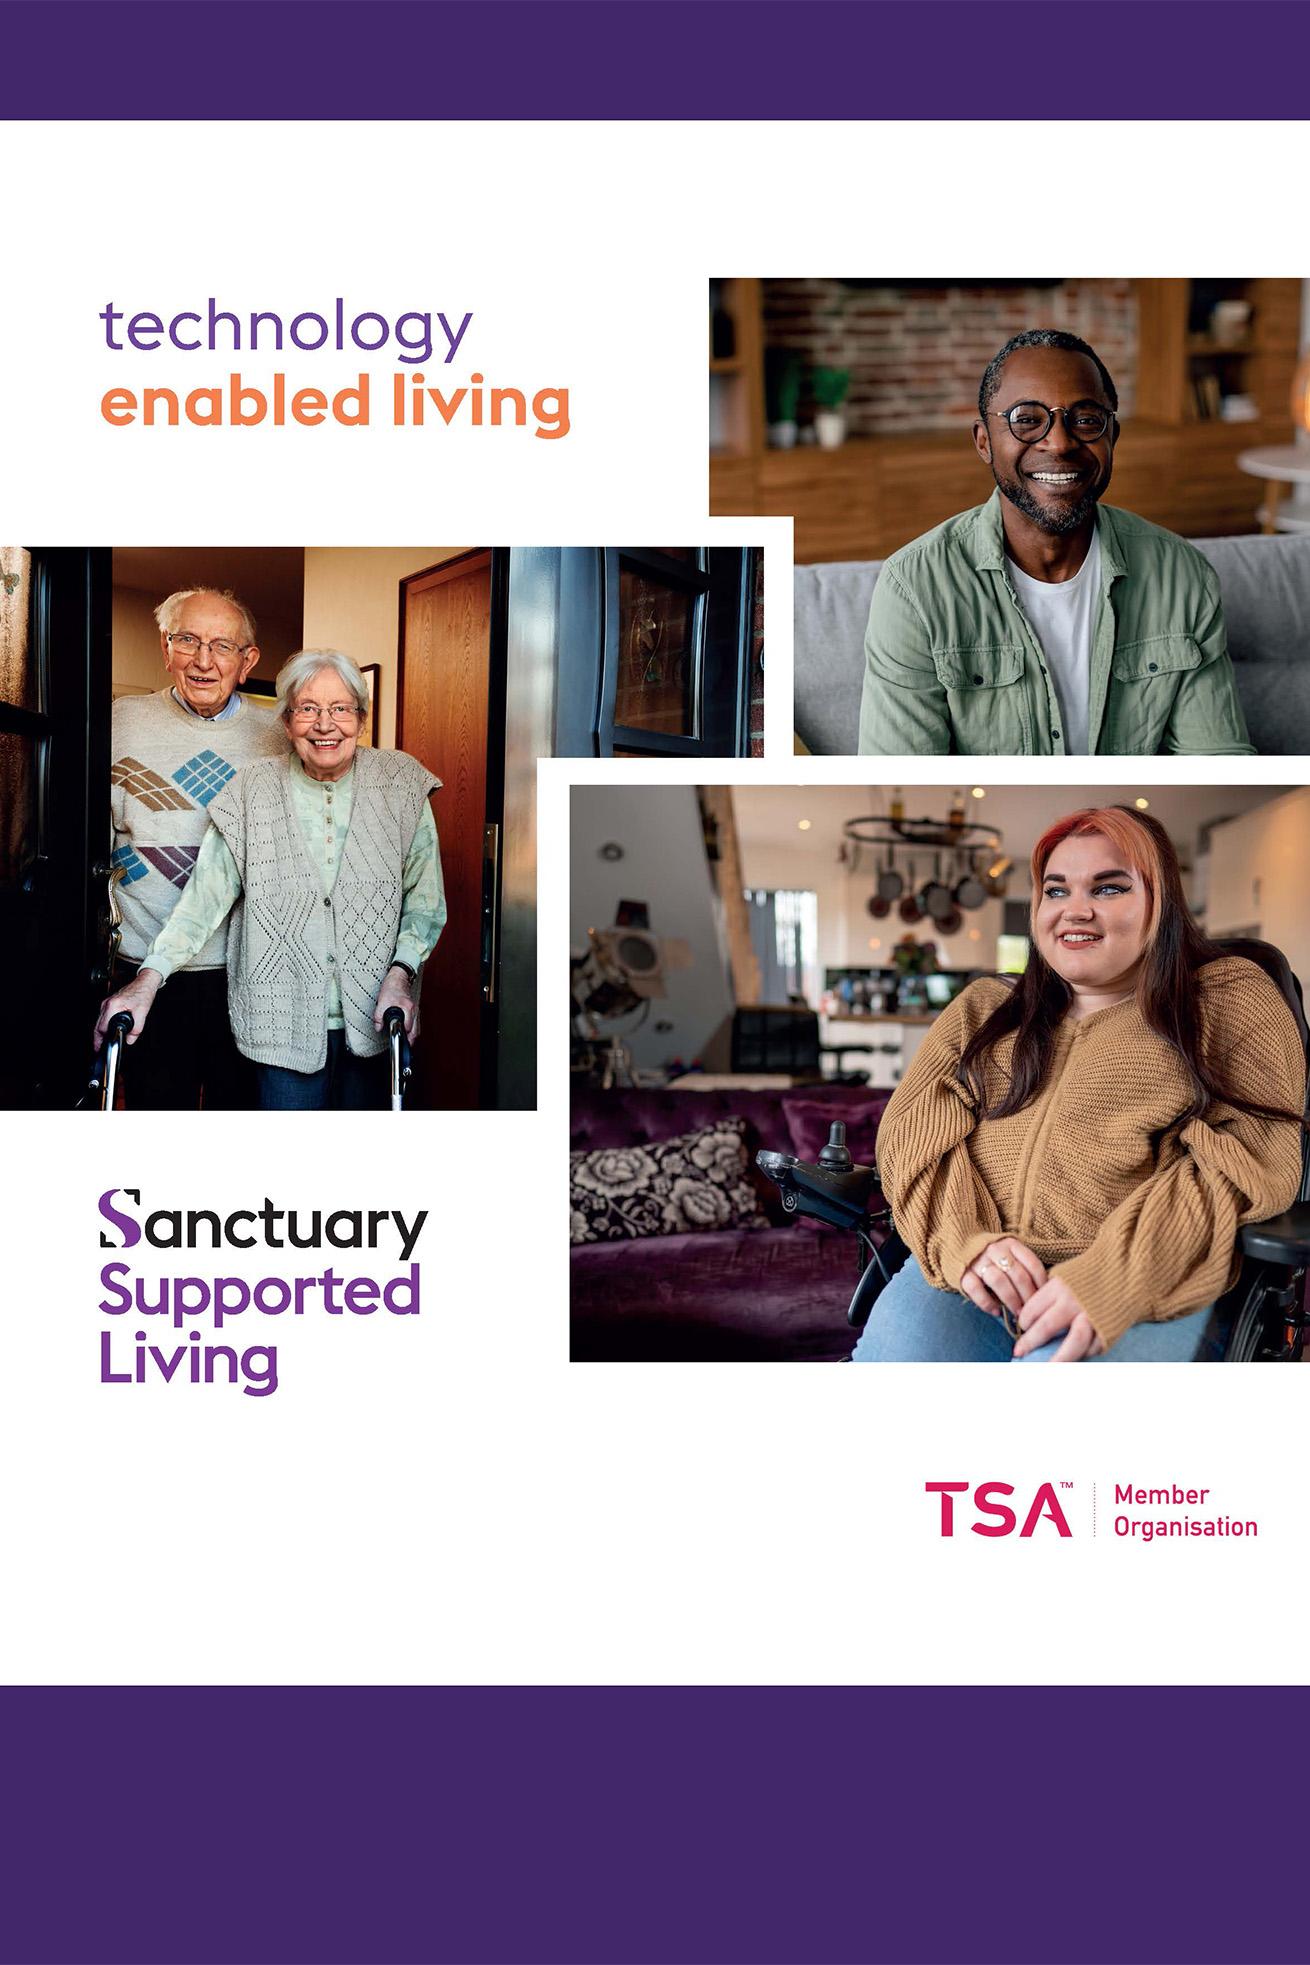 Front cover of the technology enabled living brochure